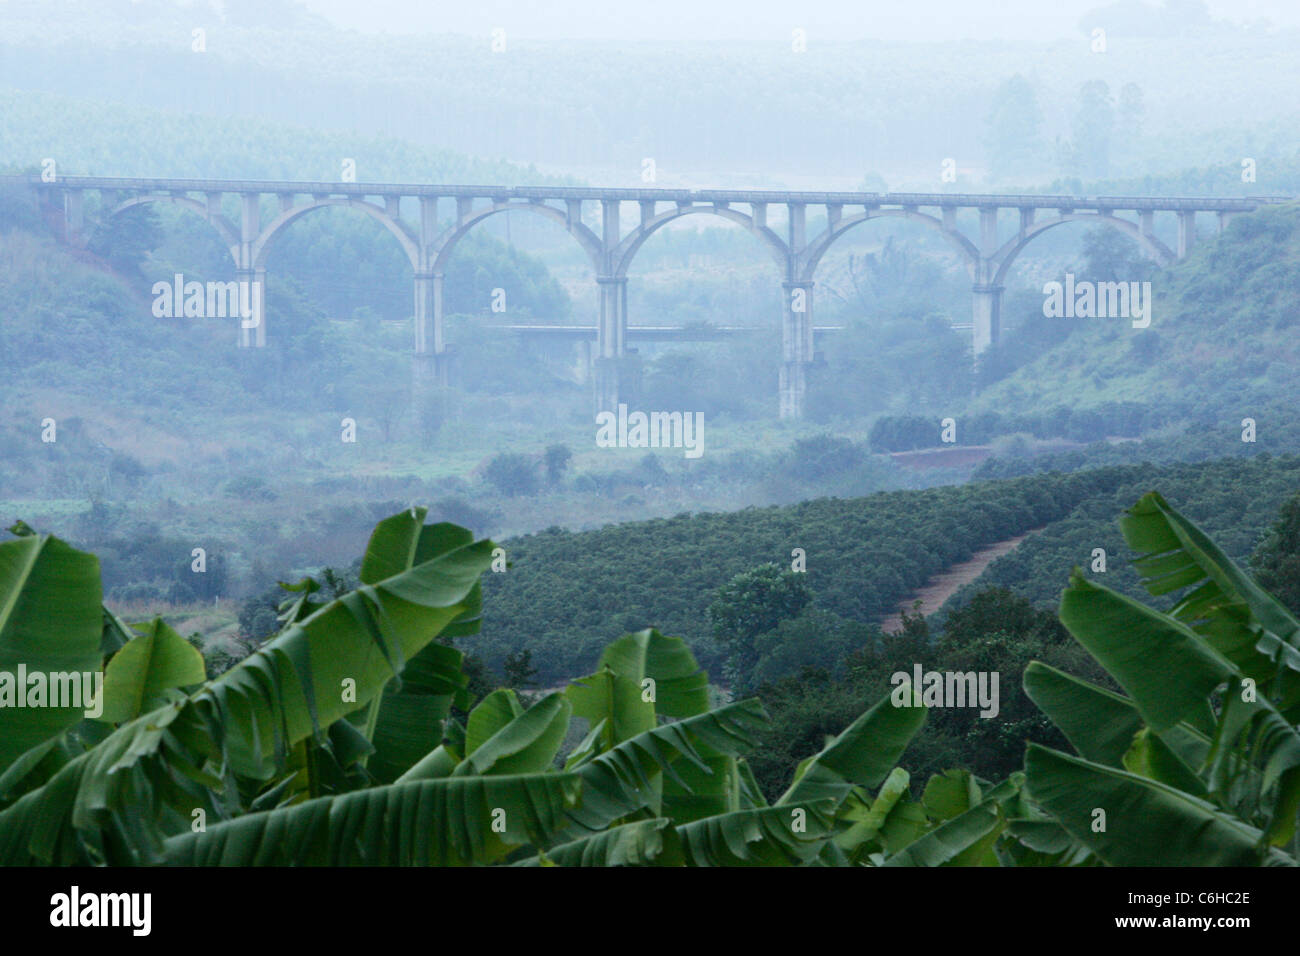 Bridge surrounded by mist with a water pipe visible through the arches and banana palms in the foreground Stock Photo